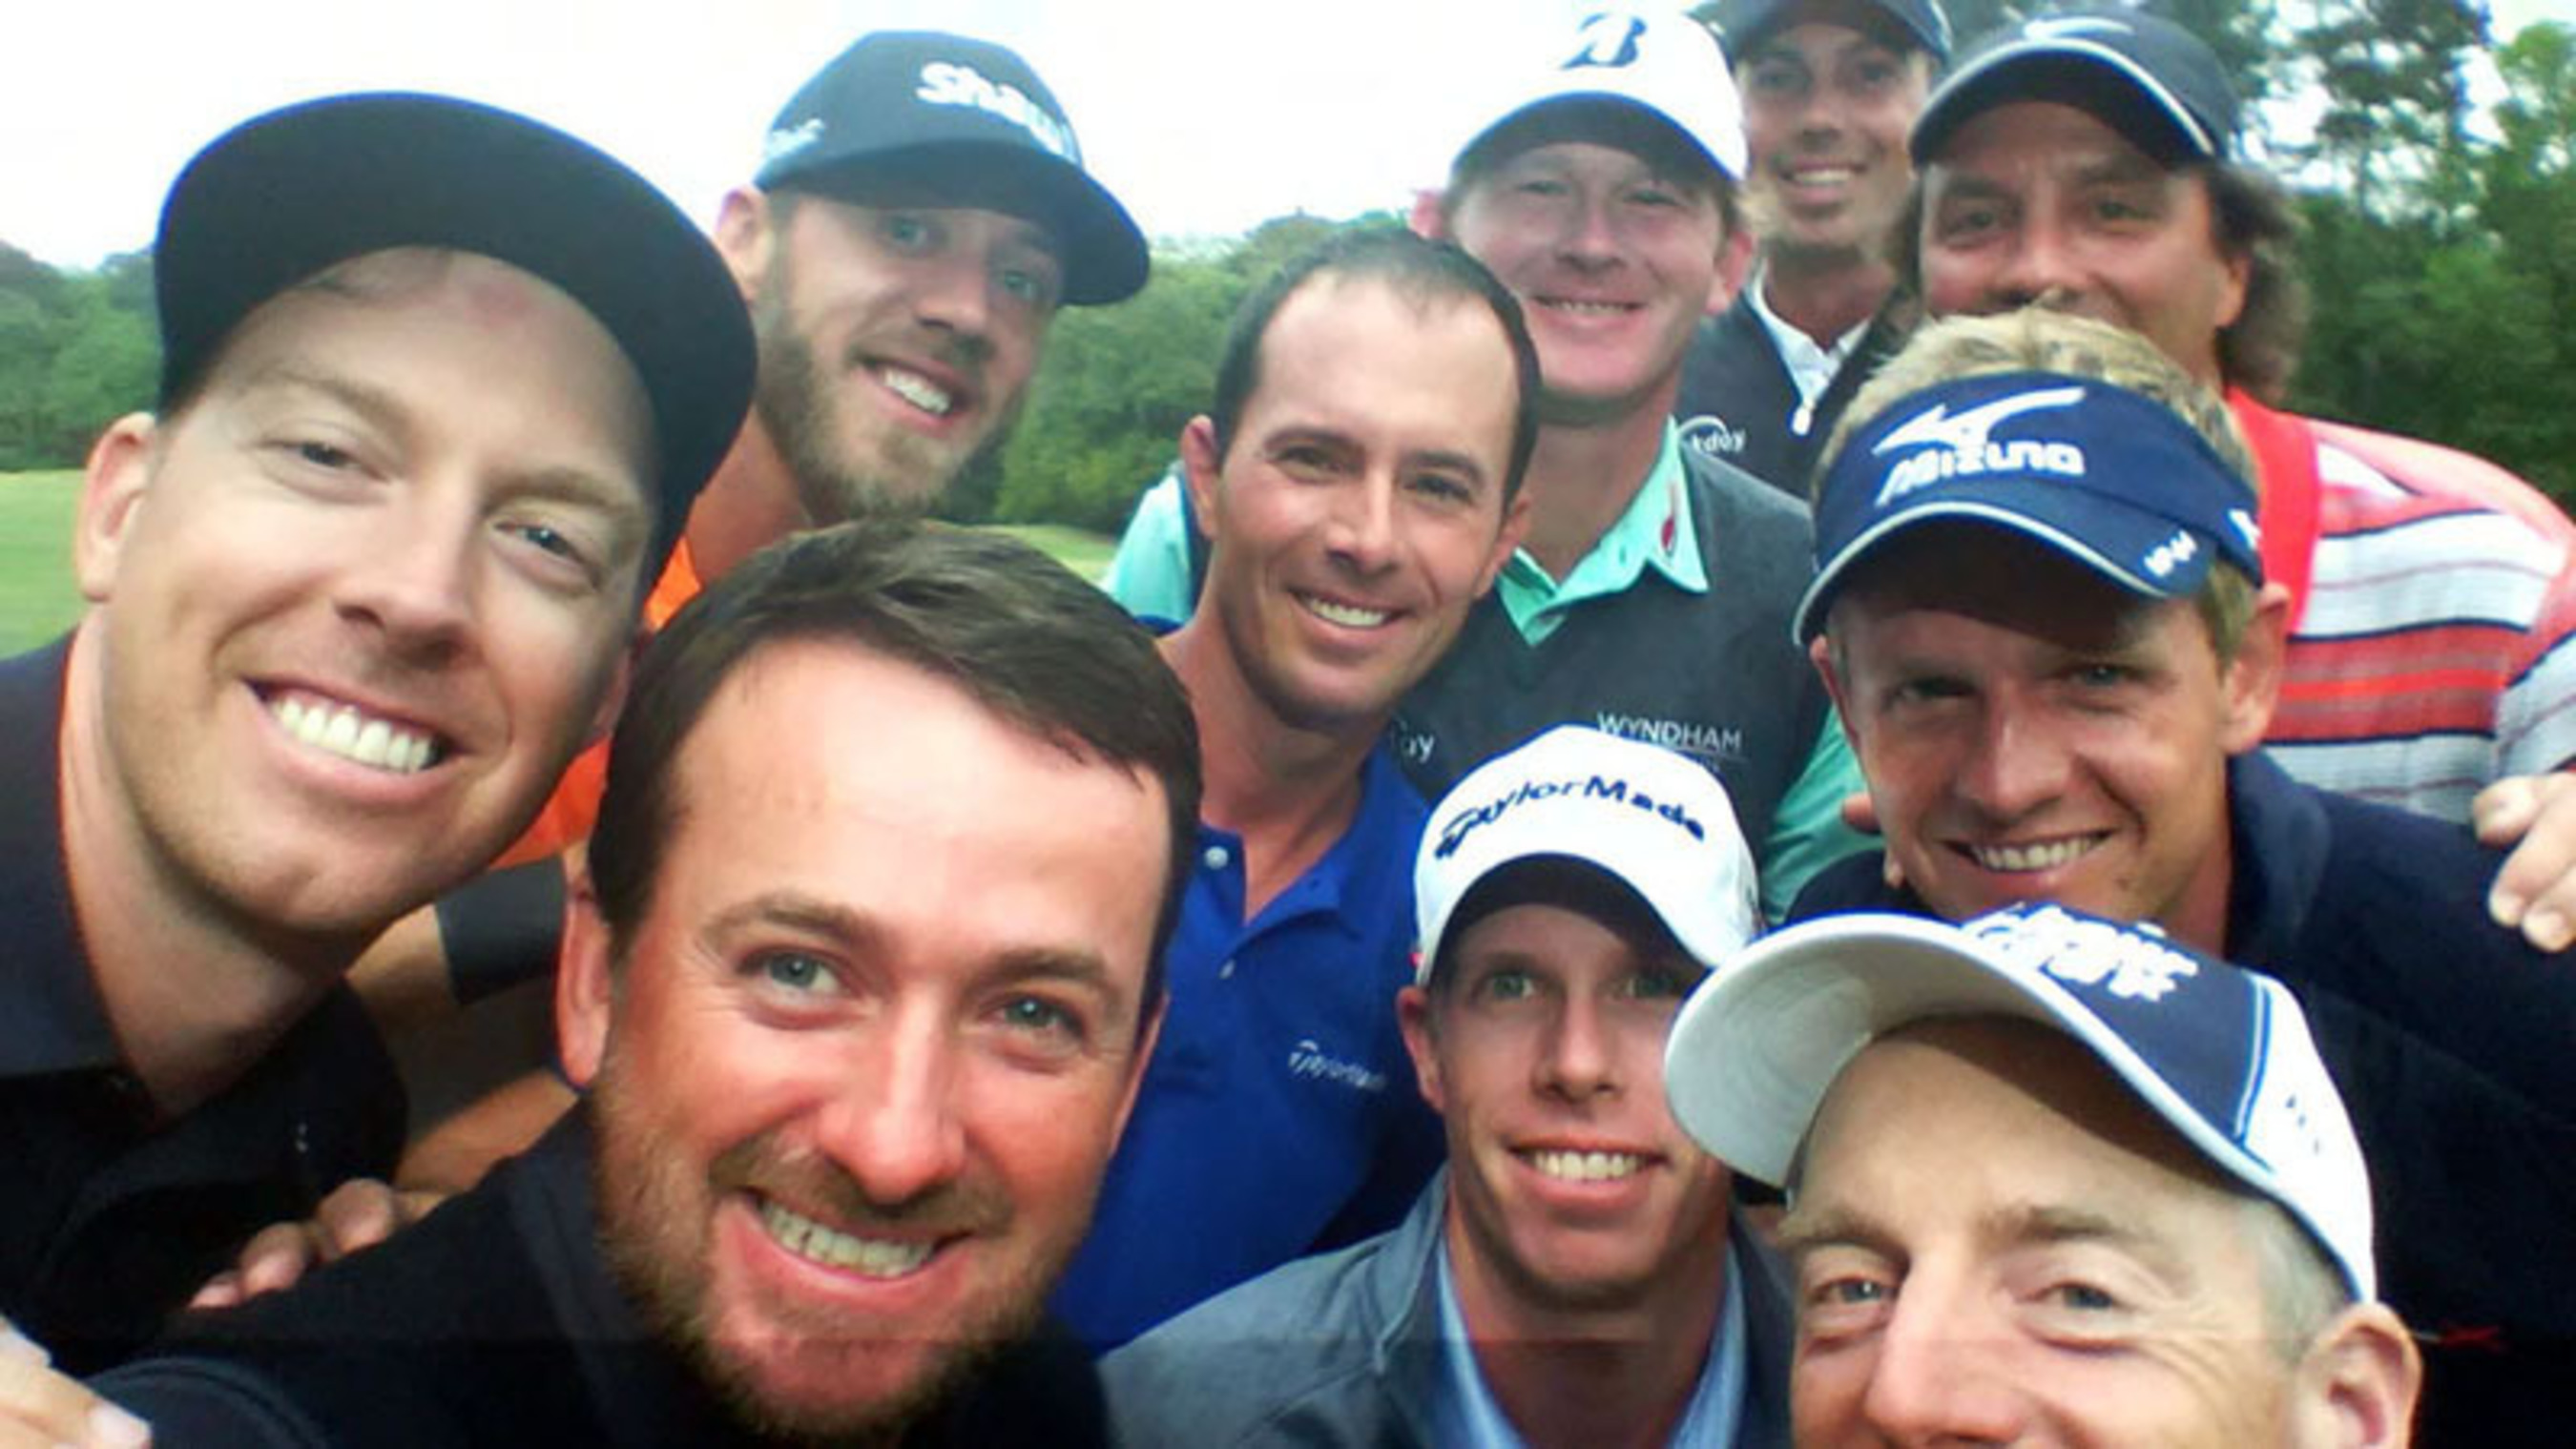 Team RBC golfers gathered in Hilton Head at the RBC Heritage to launch #RBCGolf4Kids, an online challenge designed to raise money and awareness for children's charities. They marked the occasion with a group selfie - dubbed the 'golfie' - including Hunter Mahan, Graeme McDowell, David Hearn, Jim Furyk (left to right, front row); Graham DeLaet, Mike Weir, Luke Donald (left to right, second row); Brandt Snedeker, Stephen Ames (left to right, third row); Matt Kuchar (back row). (PRNewsFoto/RBC) (PRNewsFoto/RBC)